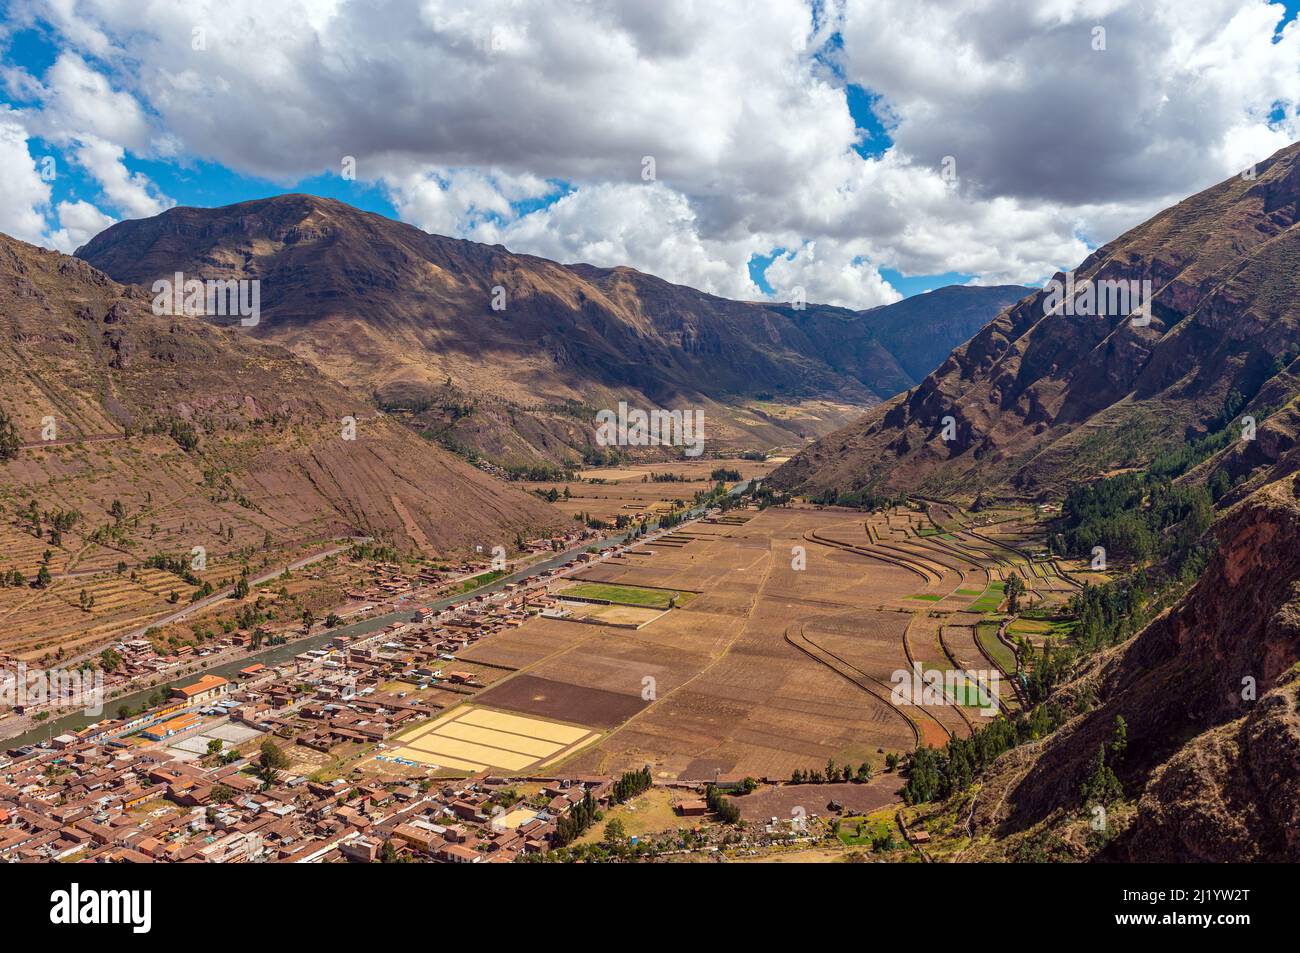 Andes mountains landscape in Sacred Valley of the Inca with Urubamba river and Pisac village, Cusco Province, Peru. Stock Photo